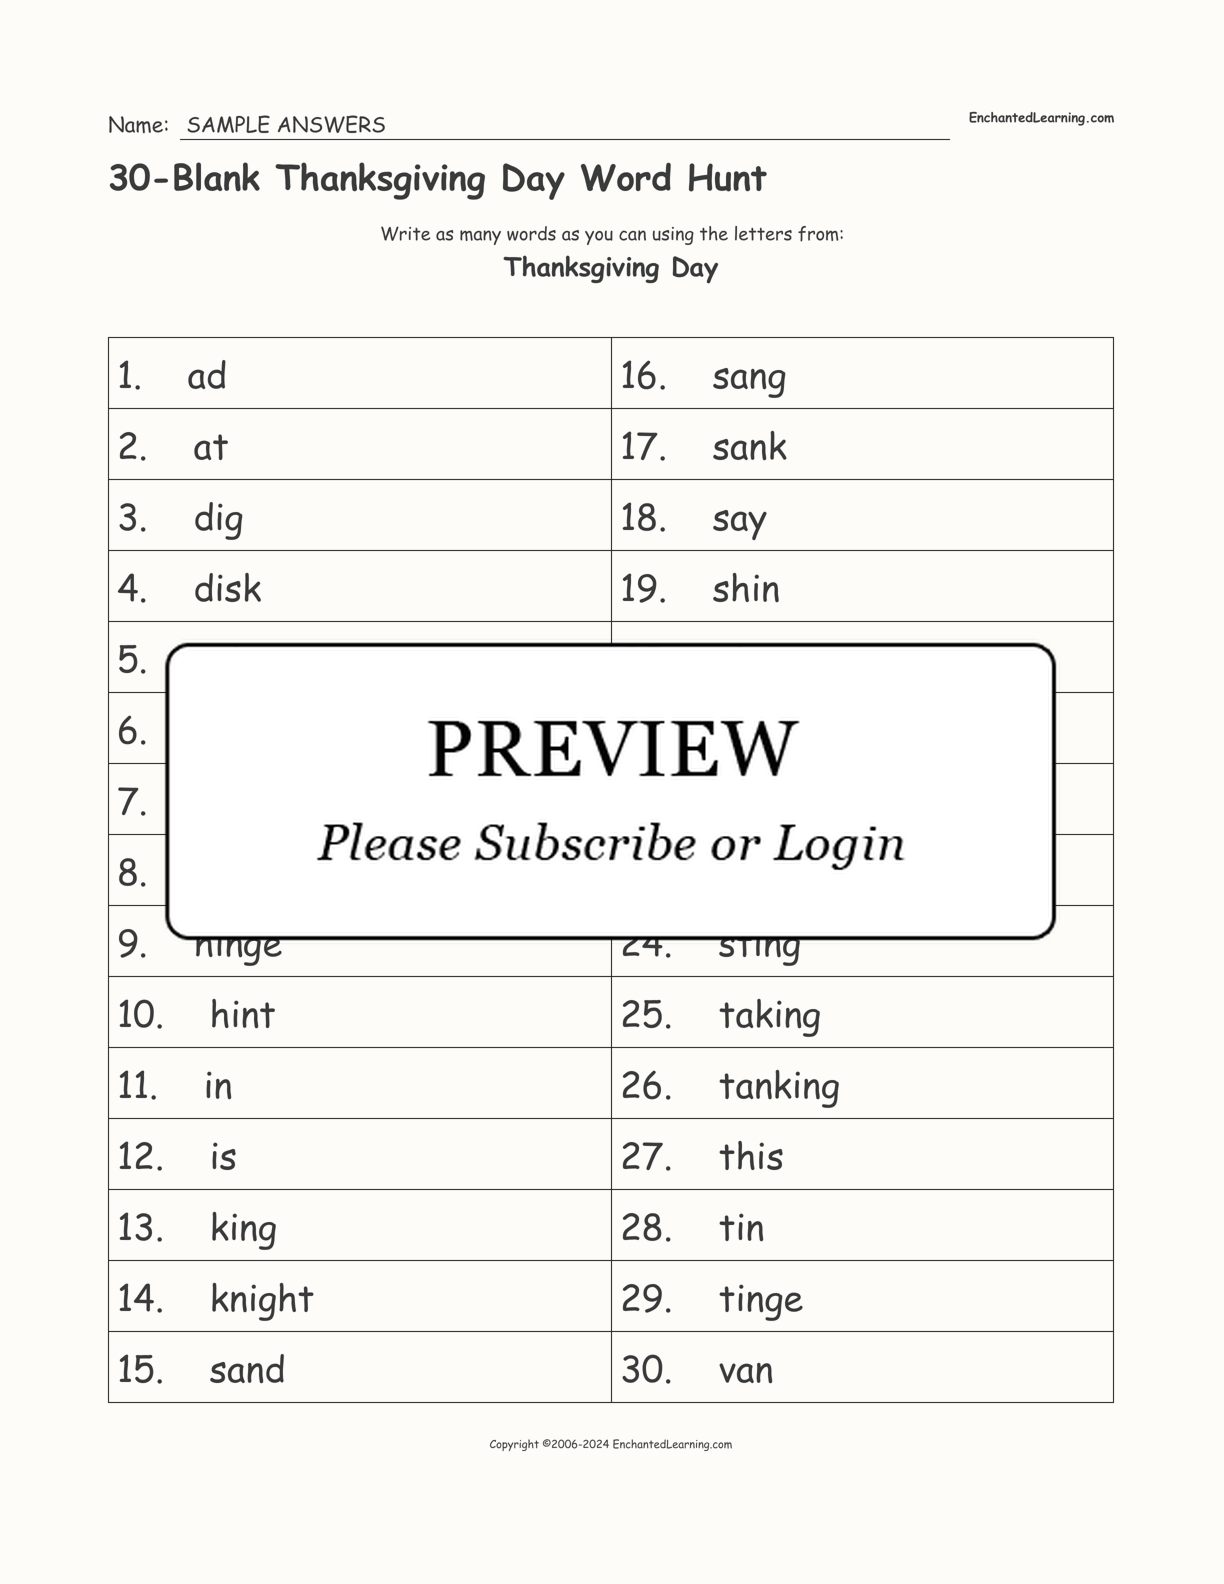 30-Blank Thanksgiving Day Word Hunt interactive worksheet page 2